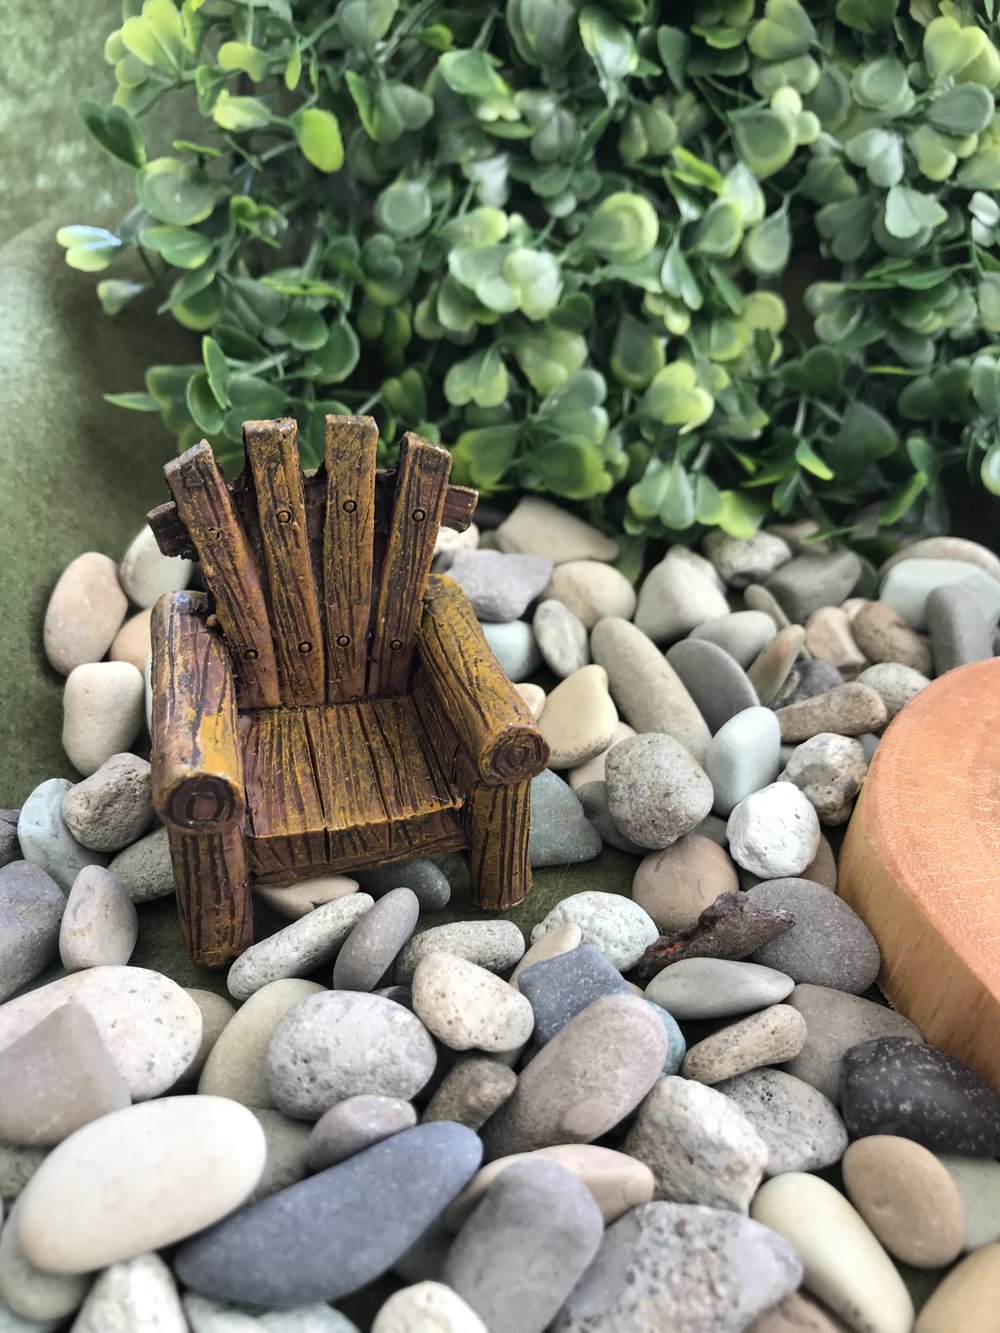 Rustic Chair